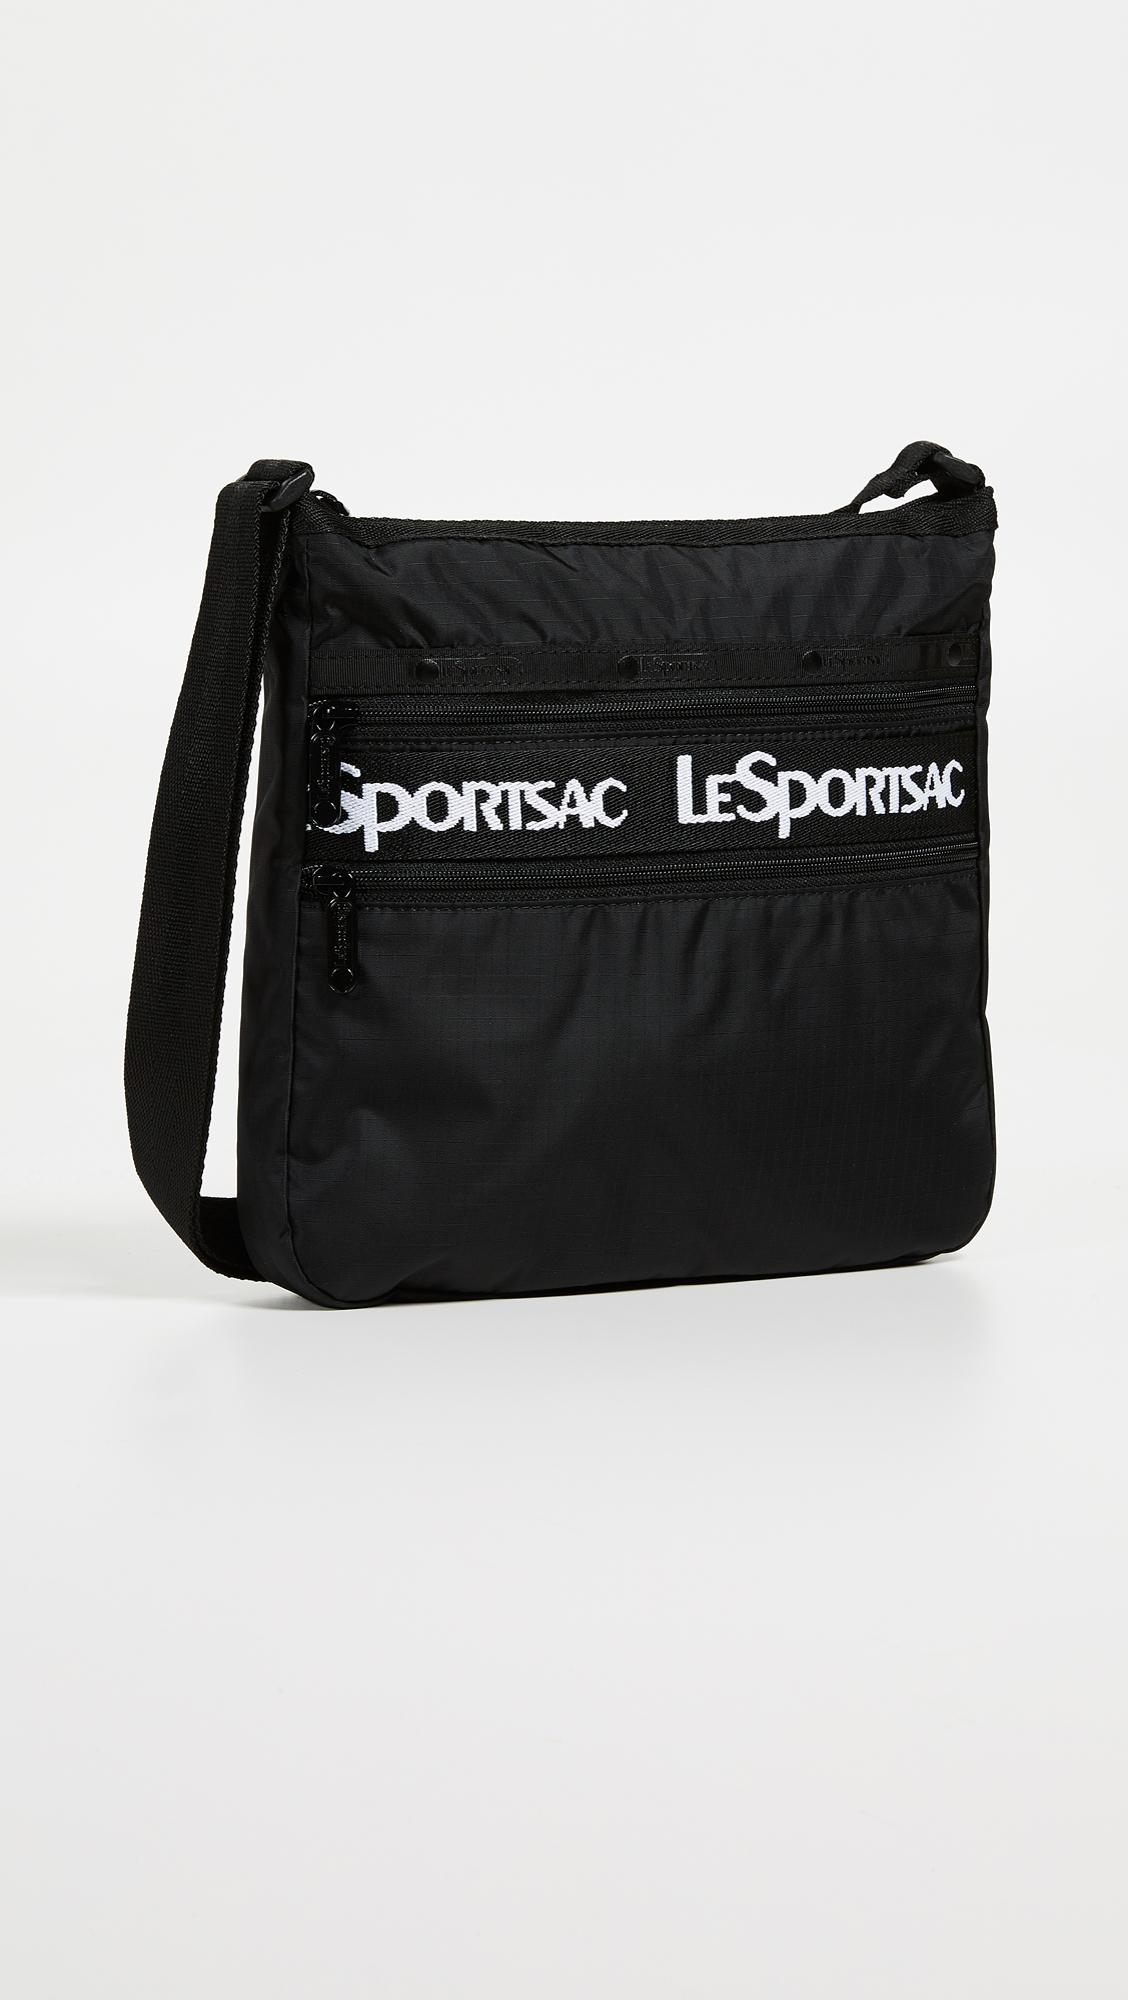 LeSportsac Candace North / South Crossbody Bag in Black - Lyst